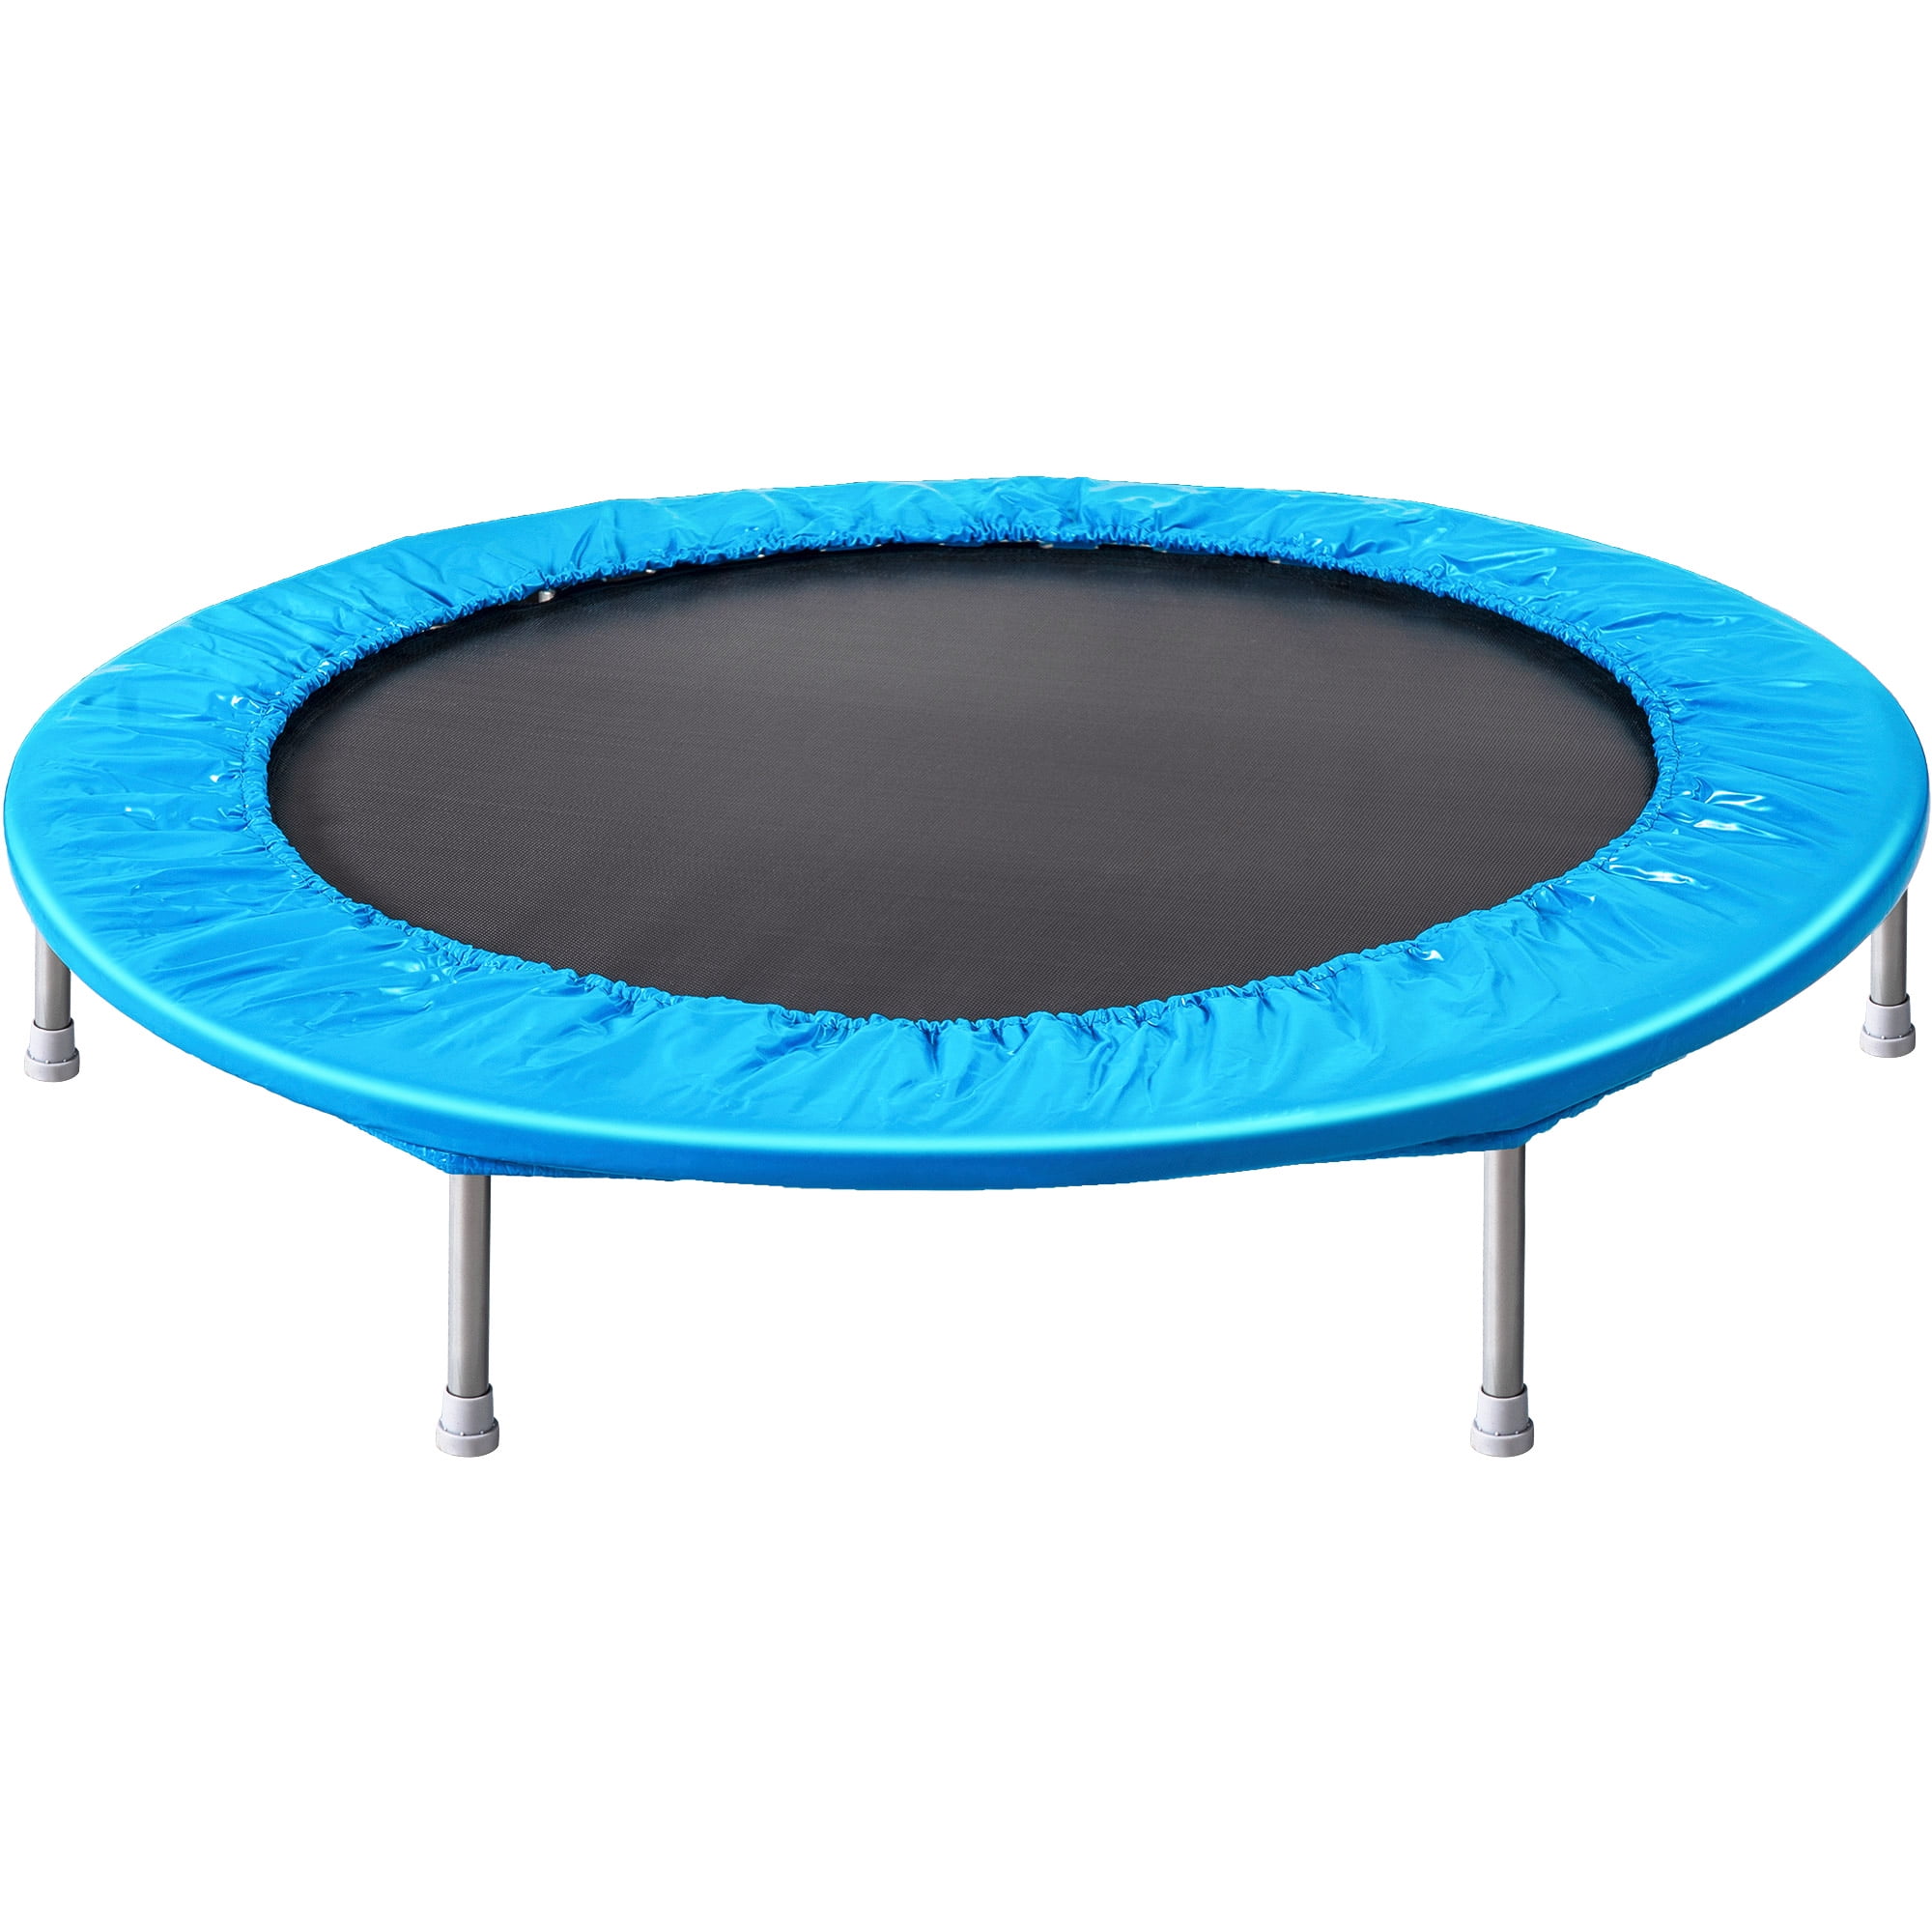 Piscis 45 Inch Rebounder Fitness Trampoline for Adults Kids, Mini Fitness Trampoline with Padding and Springs Elastic Safe for Indoor Outdoor Exercise Workout, Exercise Trampoline Holds 180 lb